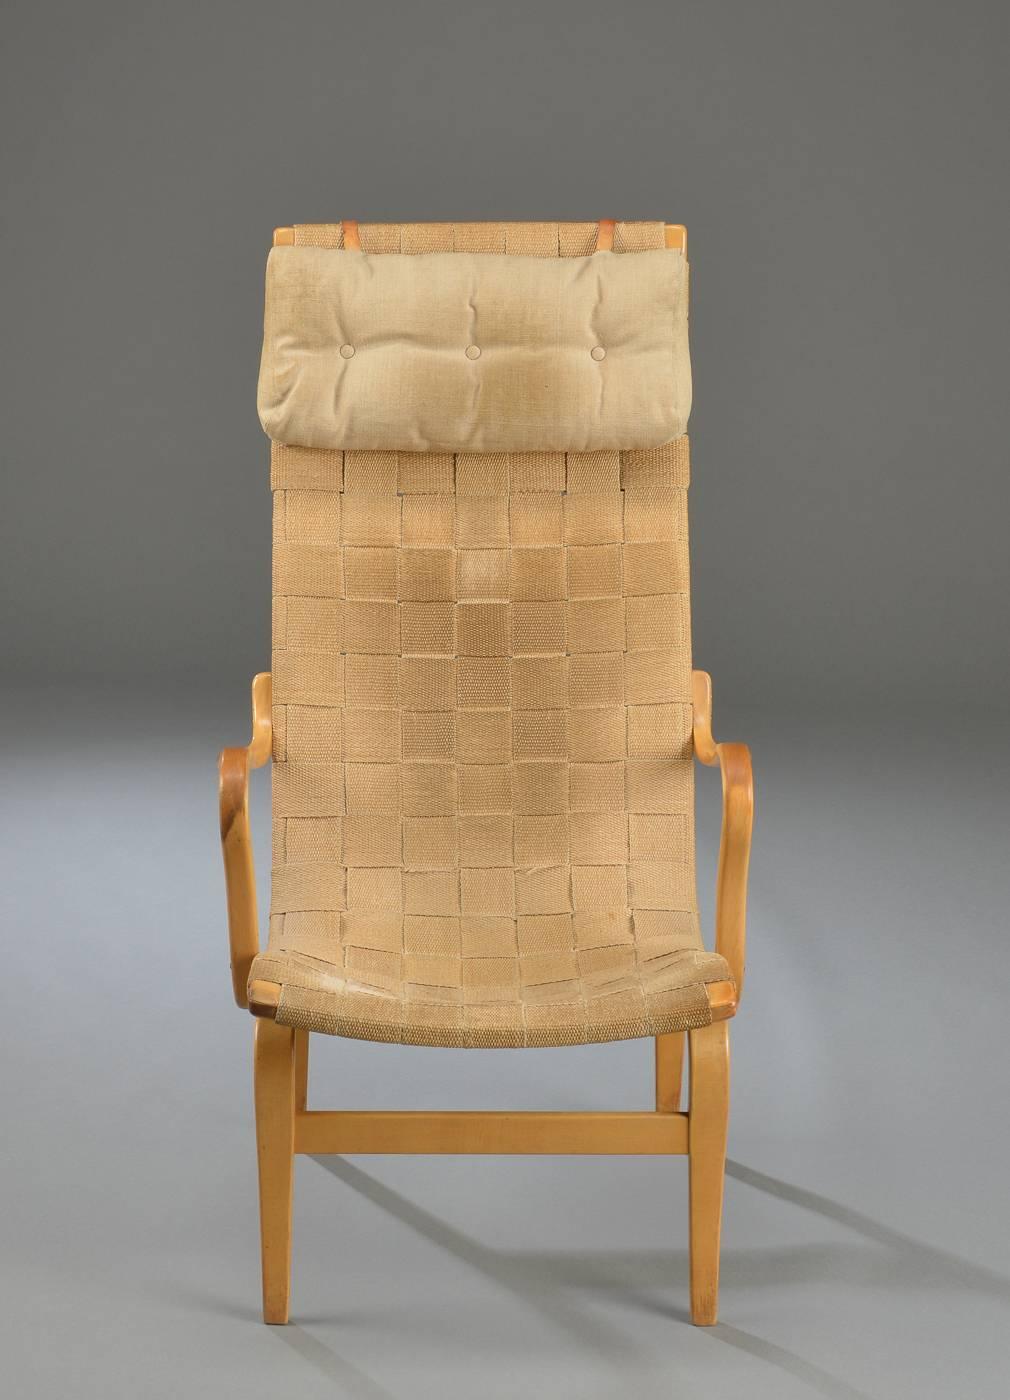 This Eva armchair by Bruno Mathsson was designed in 1969 and manufactured by Dux in Sweden. The chair features a molded beech frame, fabric webbing, and a detachable head cushion.